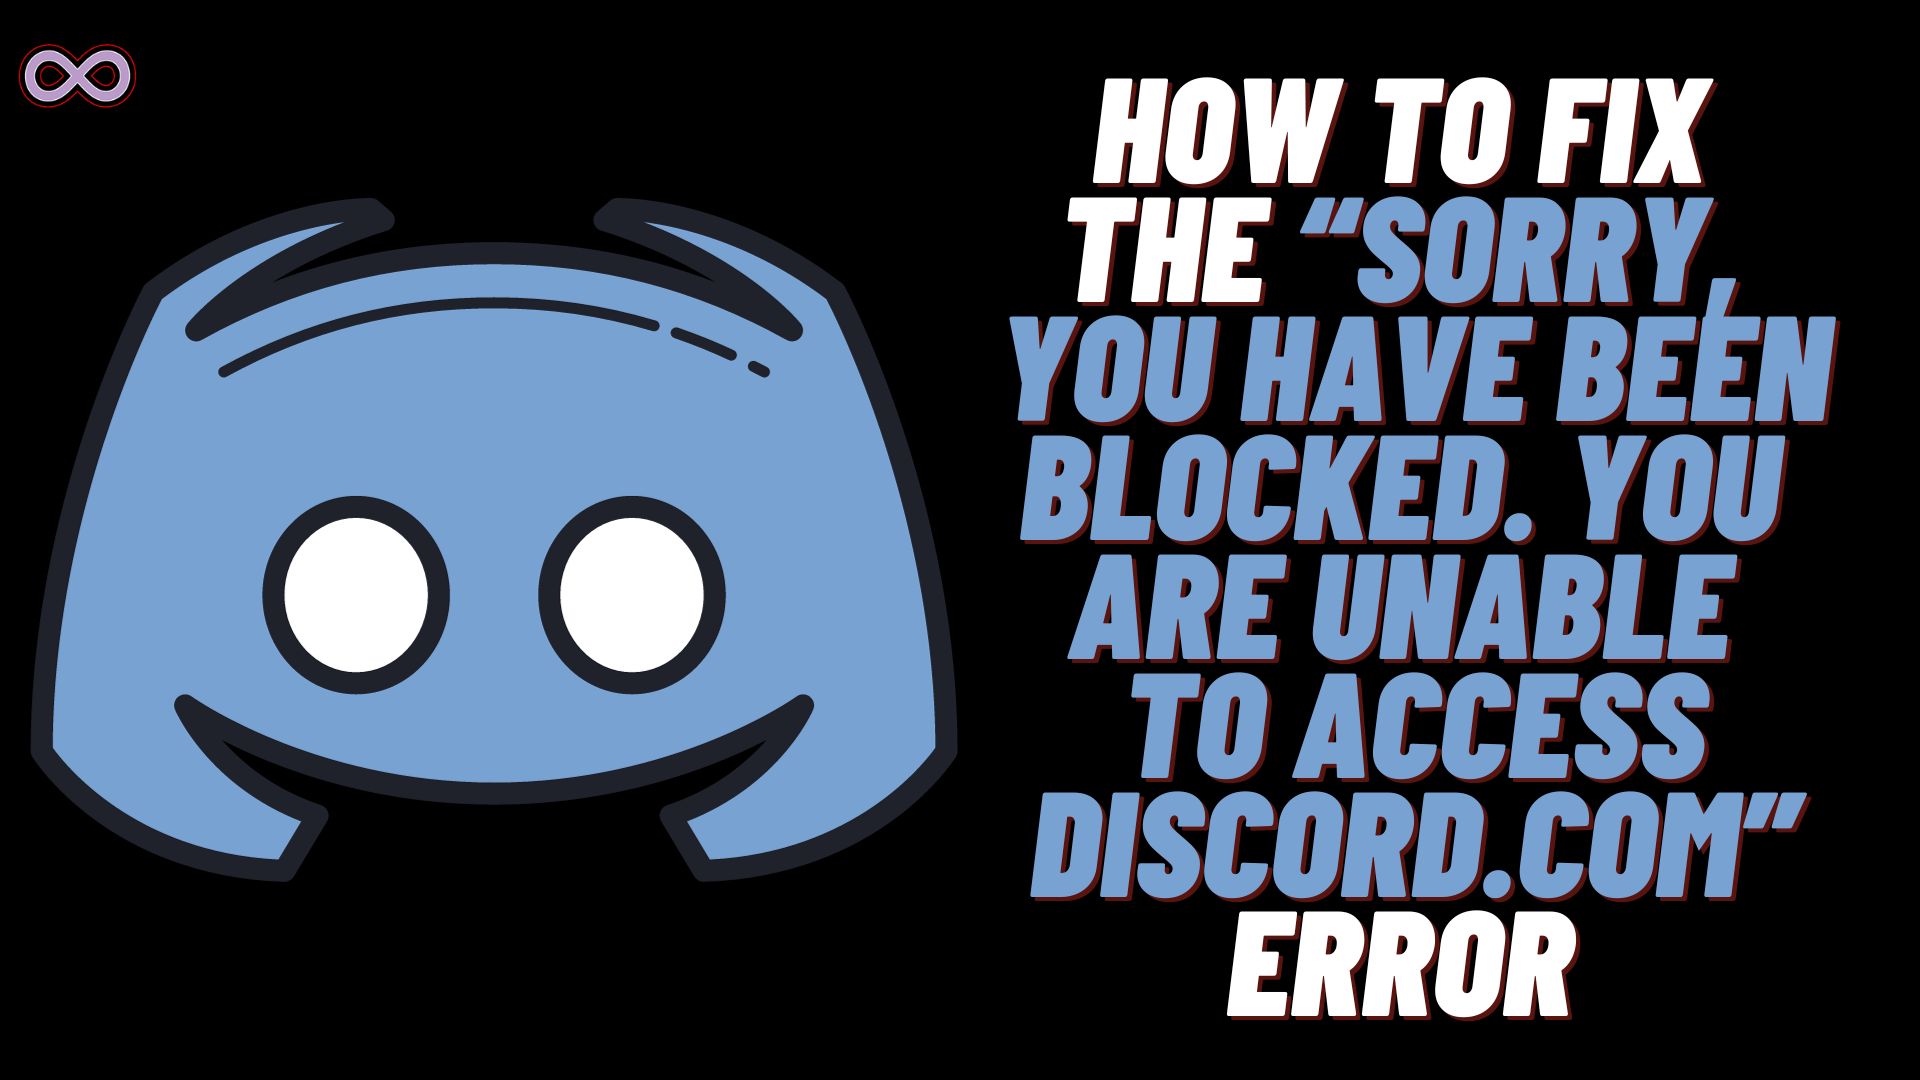 How to Solve 'Sorry, you have been blocked' on Discord